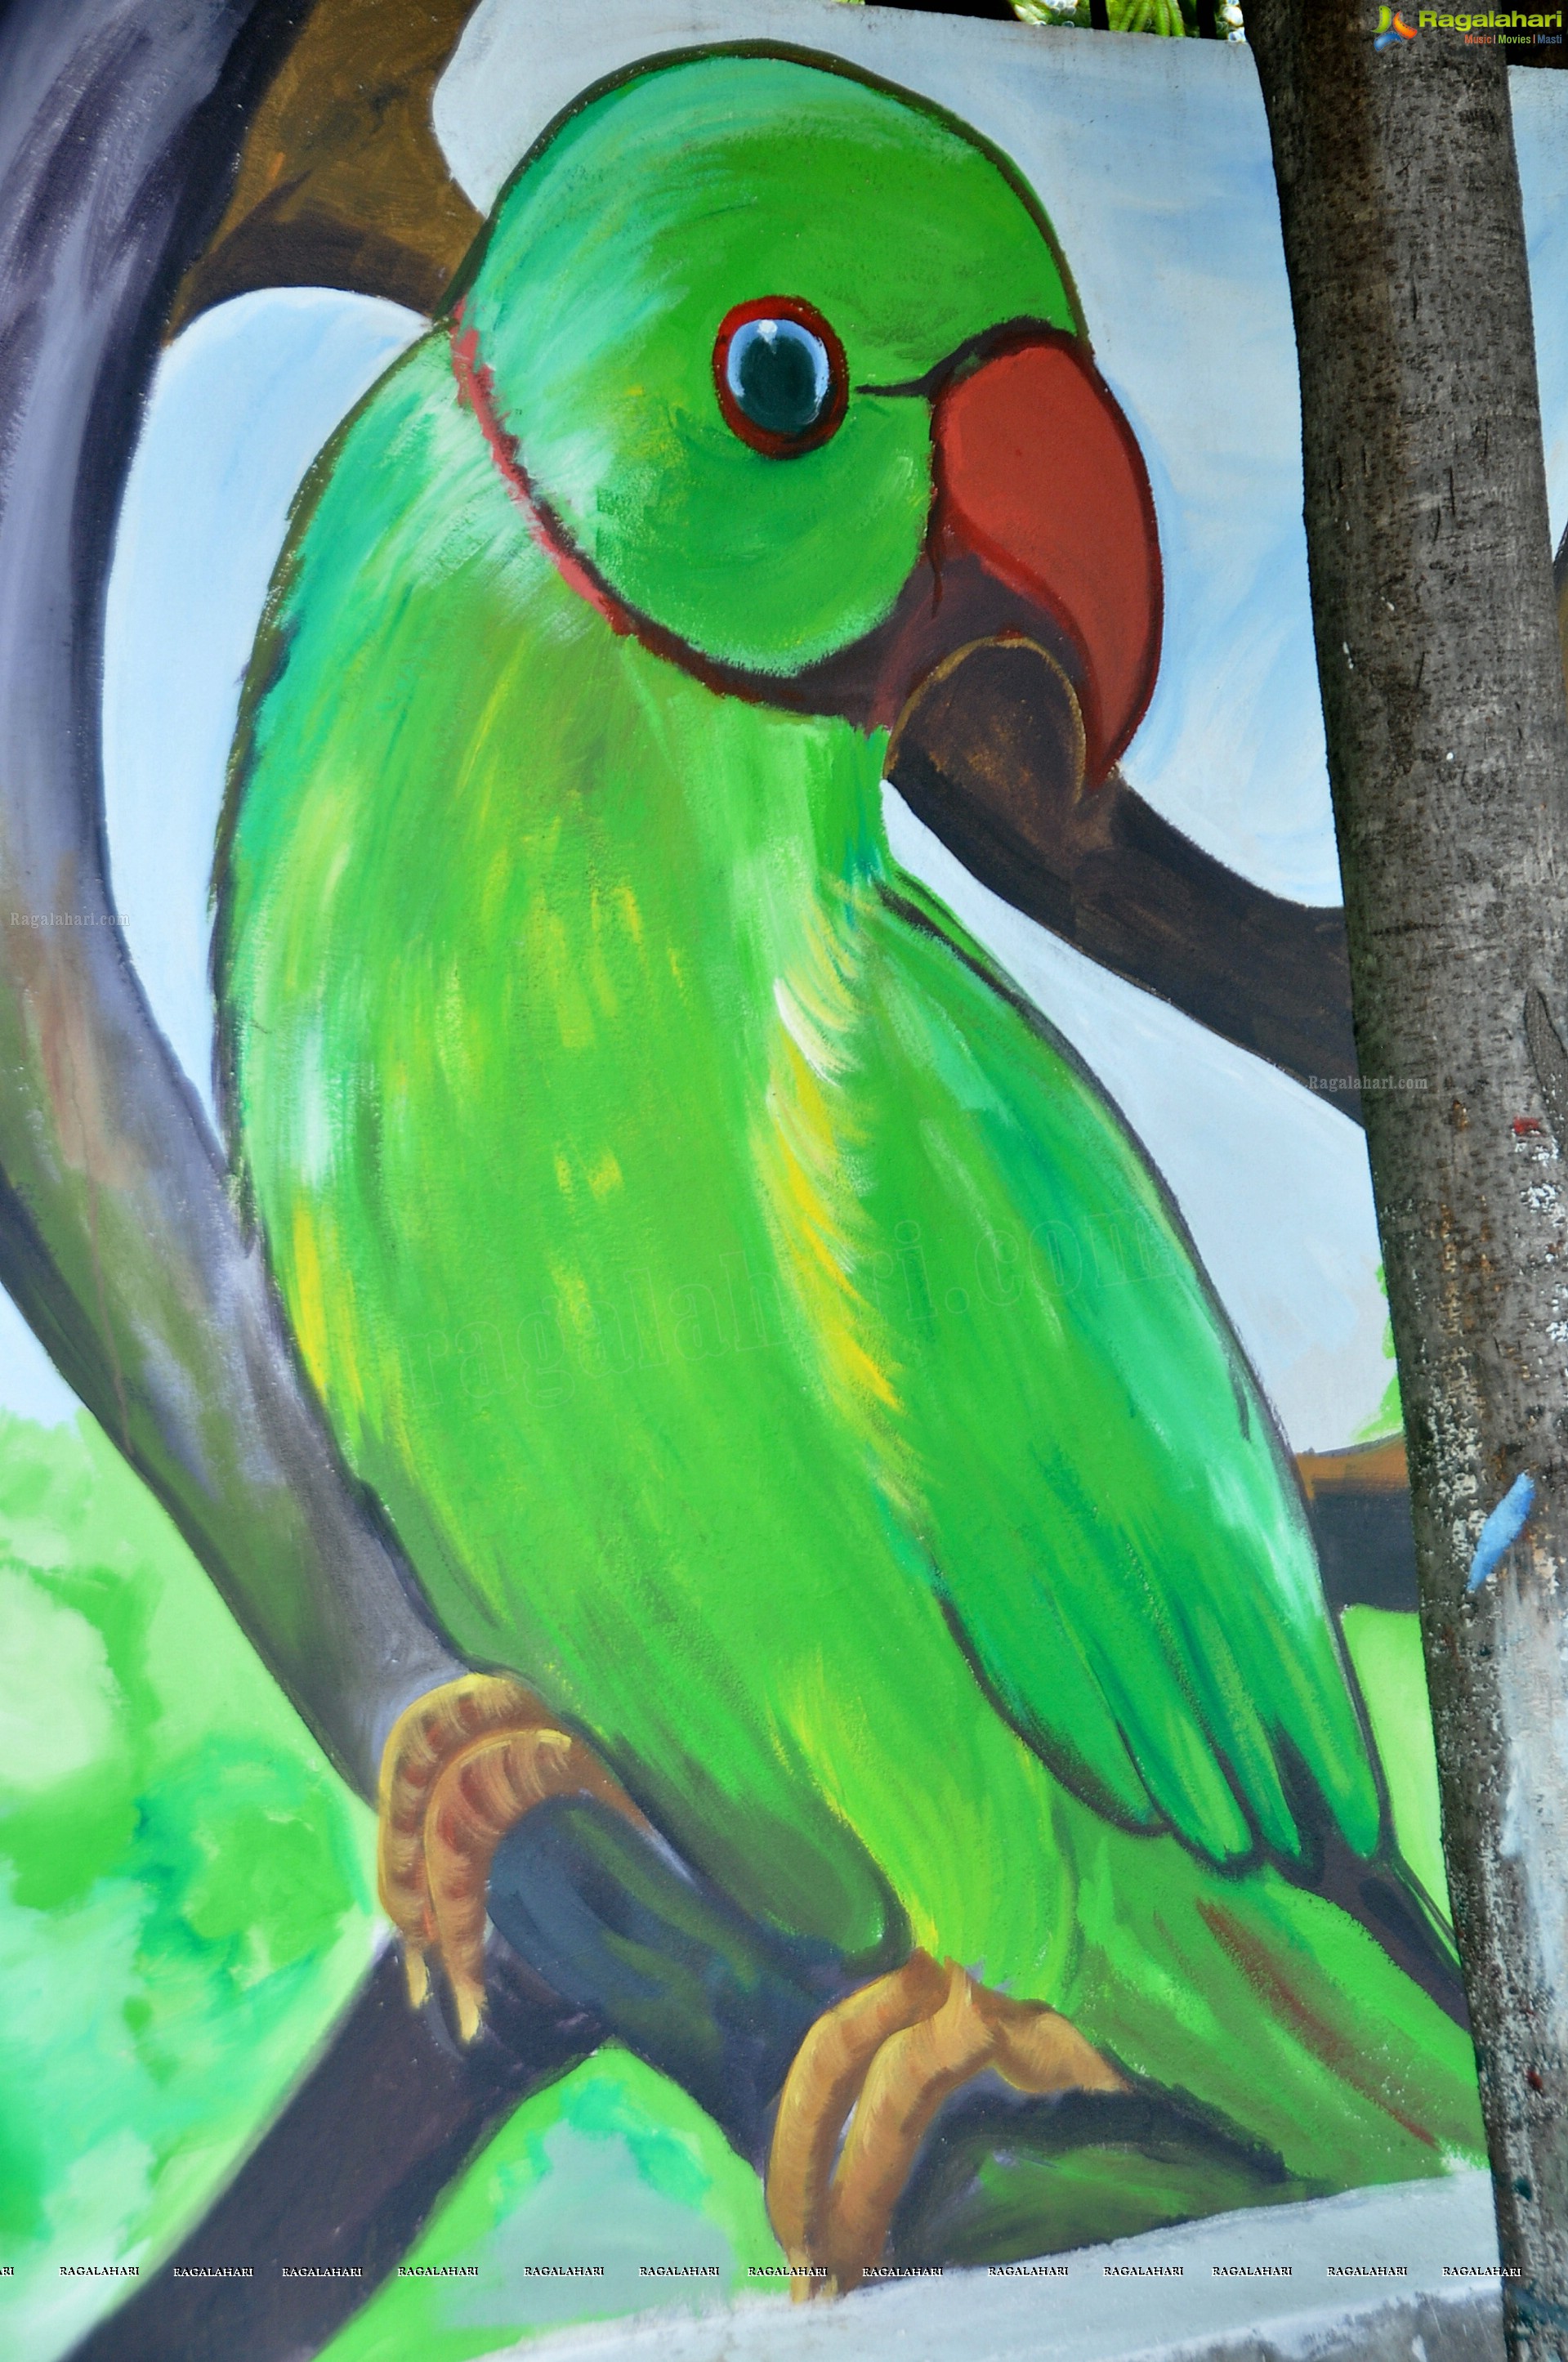 Paintings on the Masasb Tank Flyover on the eve of CoP-11 on Biodiversity